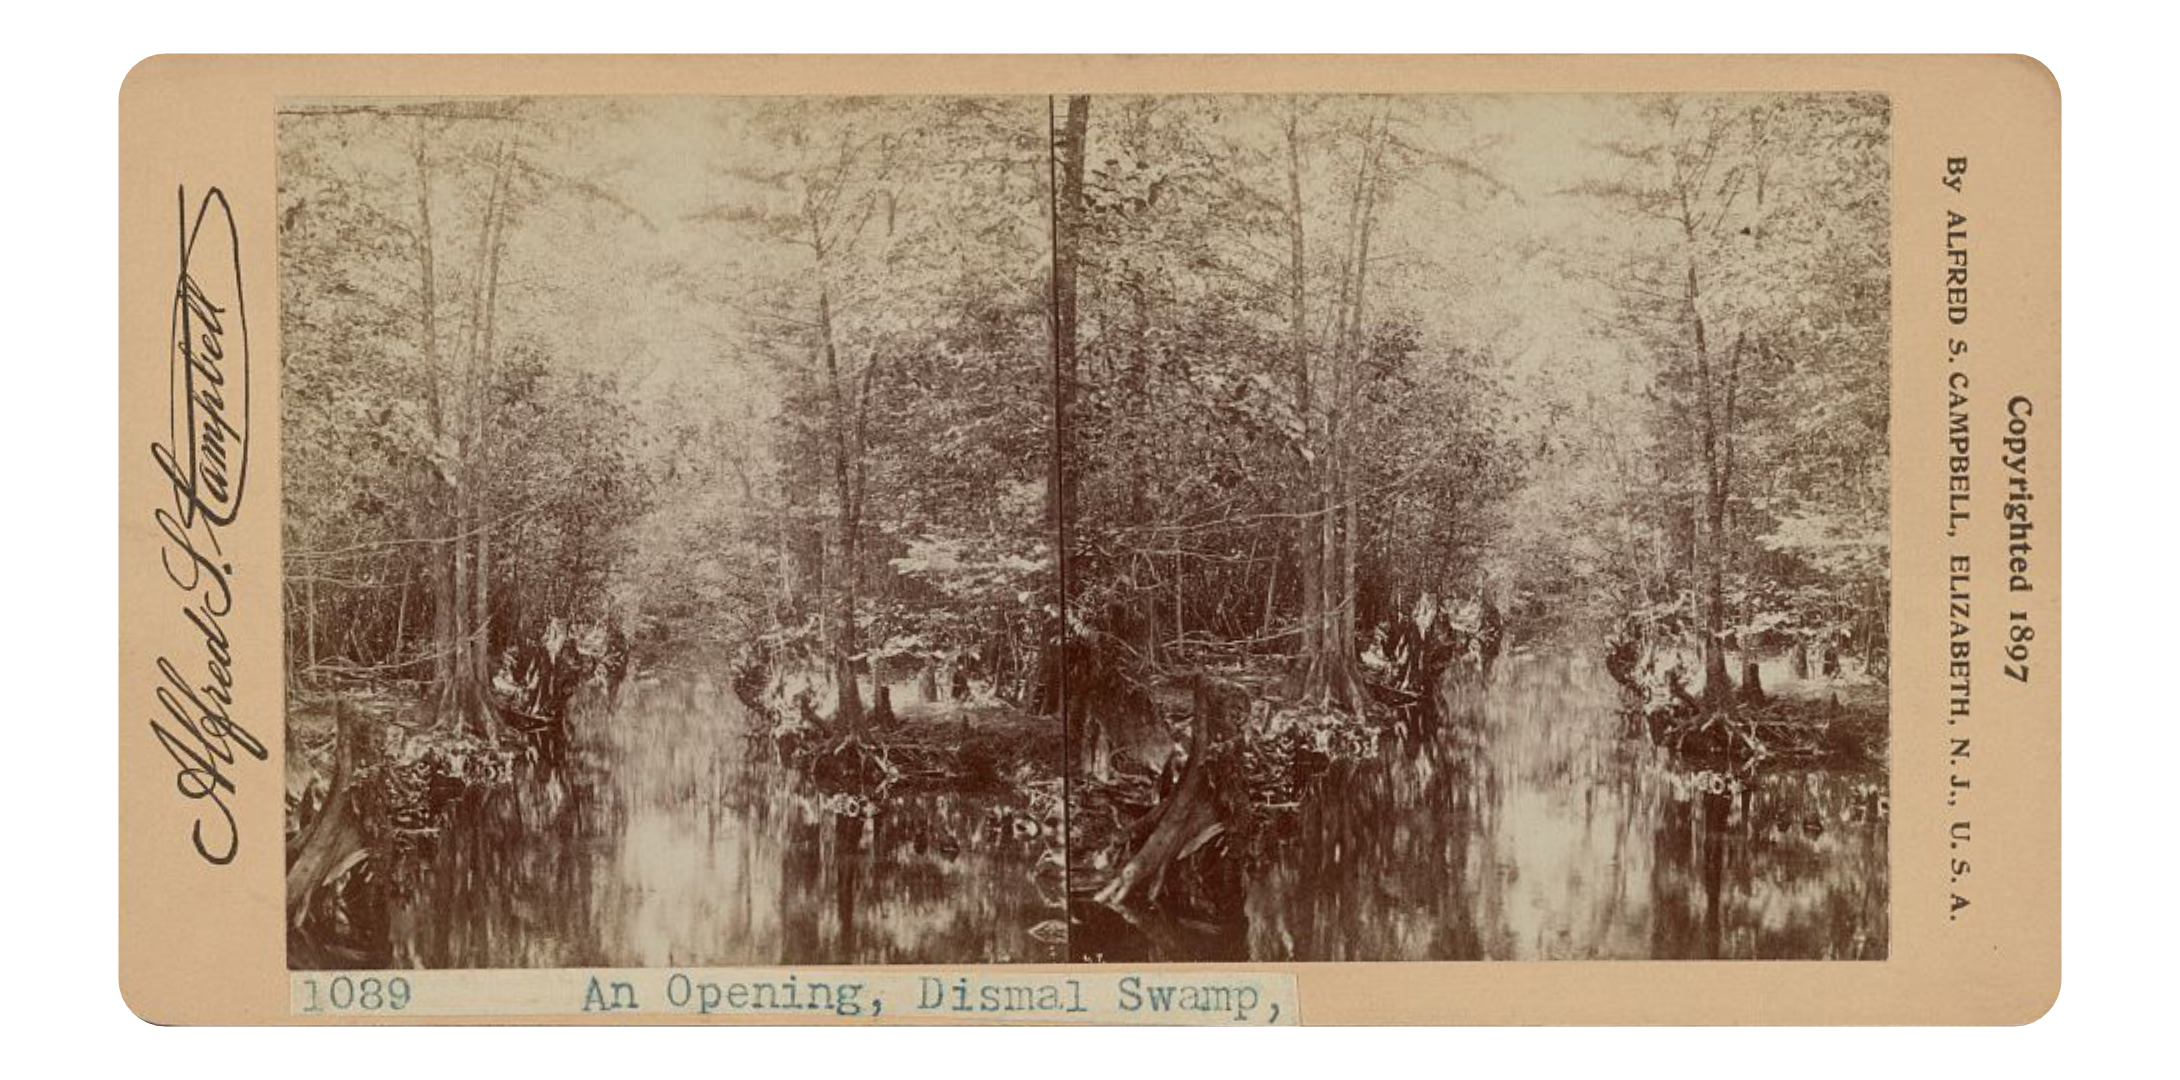 Sounds from the Great Dismal Swamp - antique stereoscopic image by Alfred Campbell